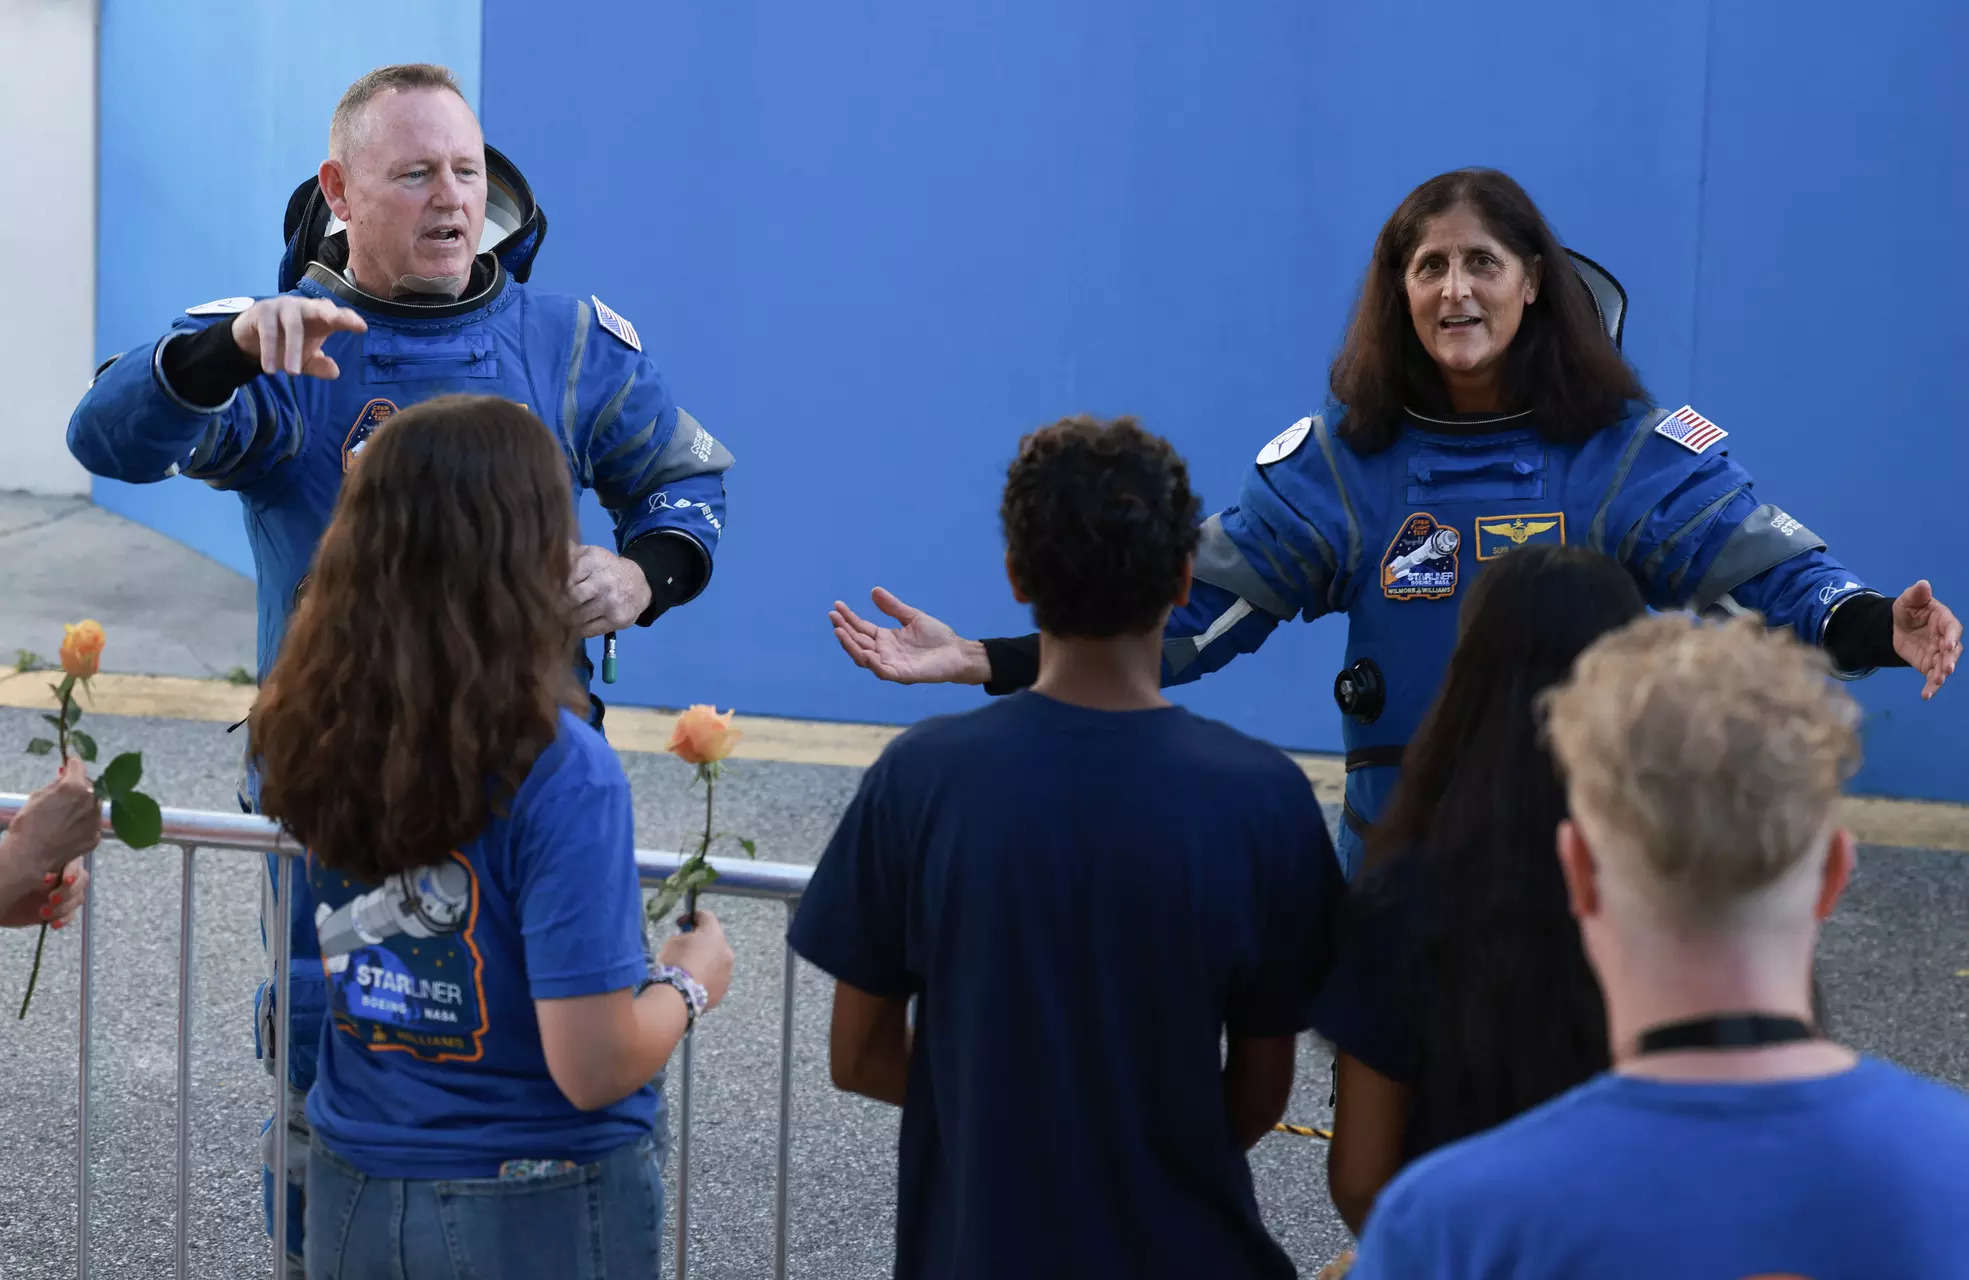 When will Sunita Williams, Butch Wilmore return to Earth? NASA astronauts on Boeing Starliner have this much time 